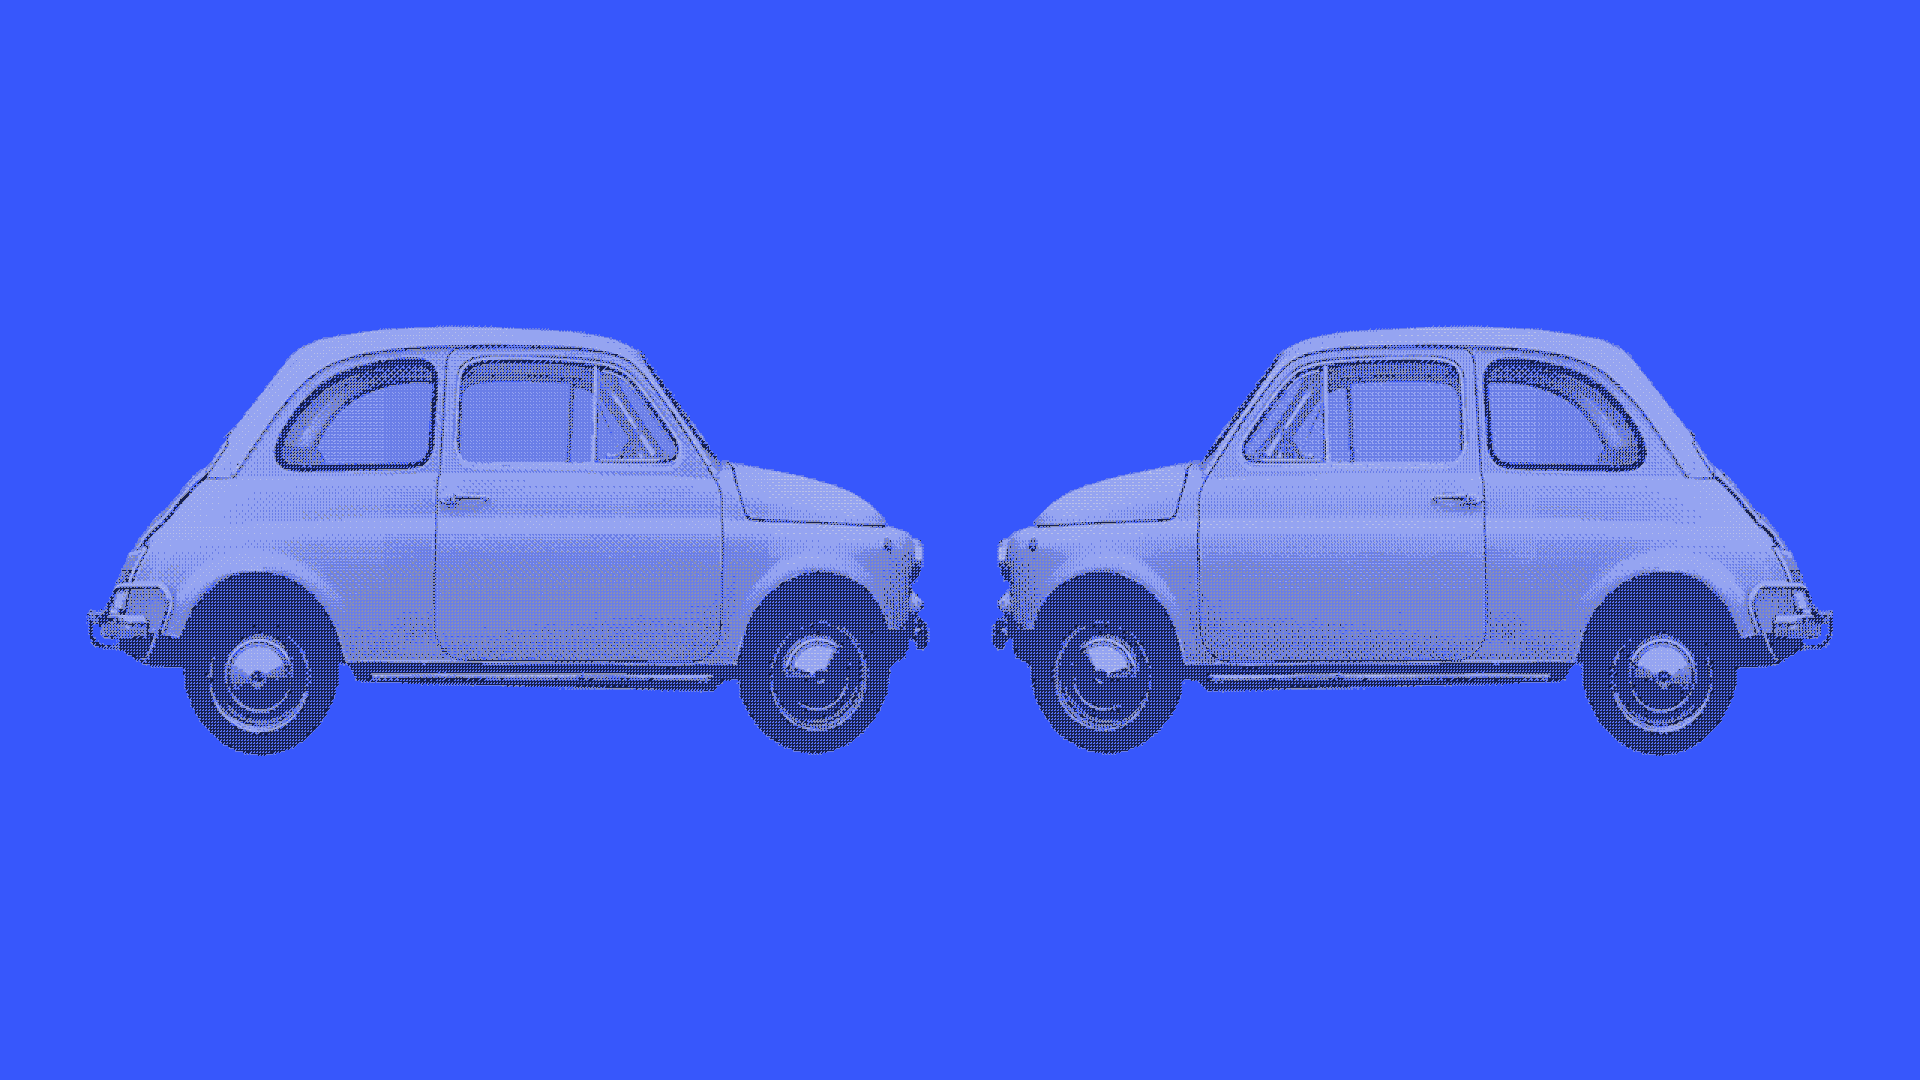 Illustration of two cars merging into one